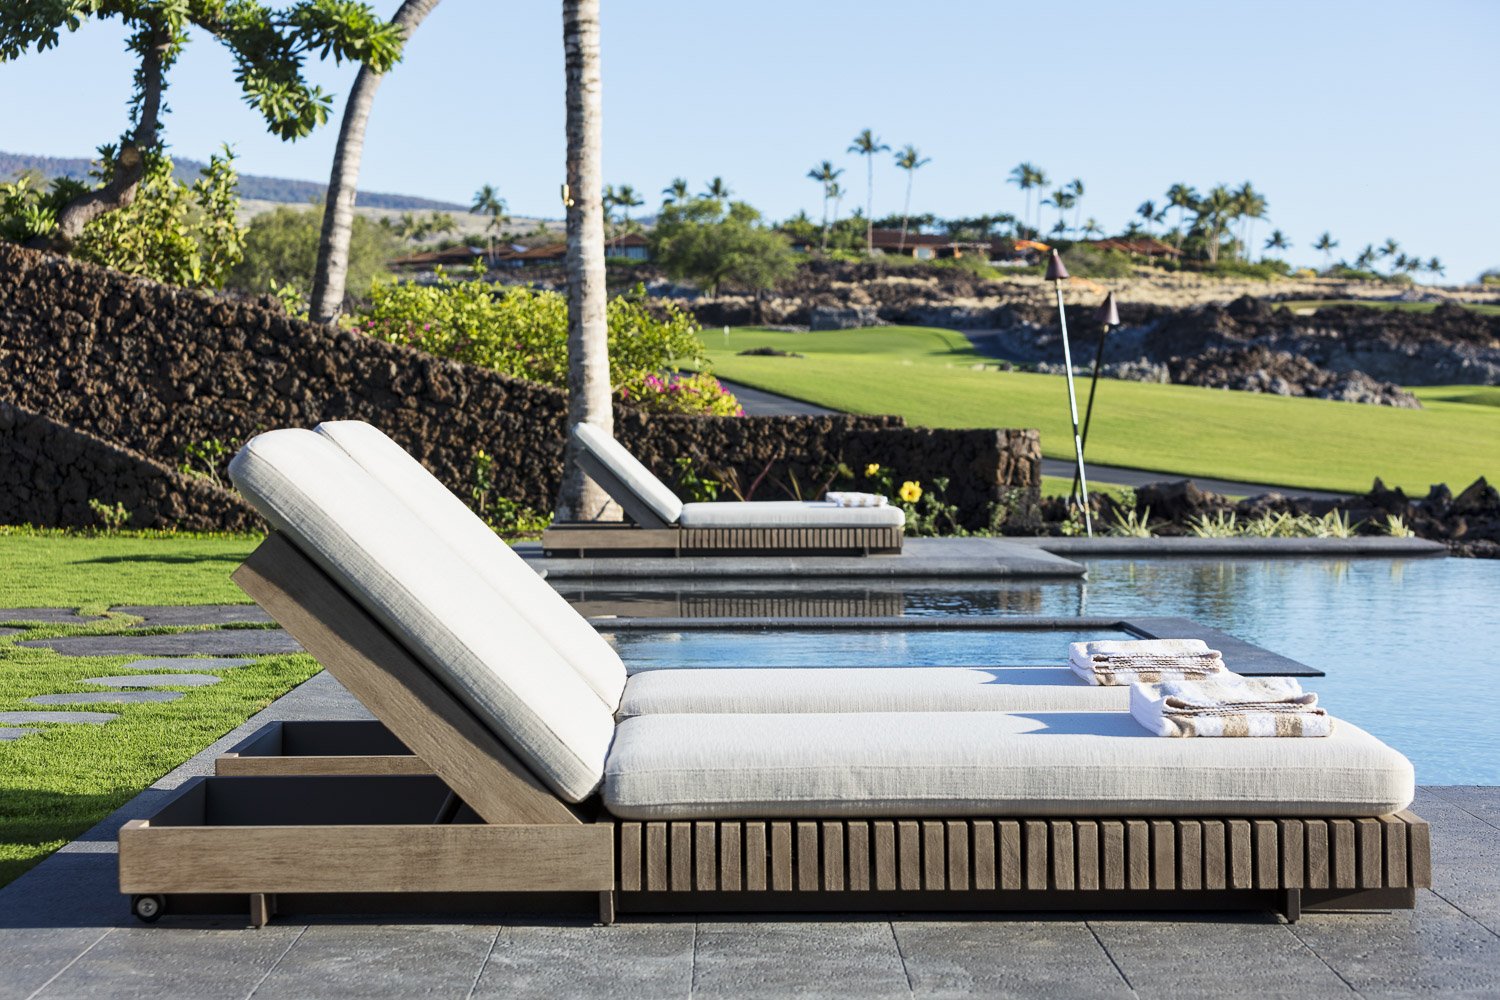  Chaise Lounges Poolside 